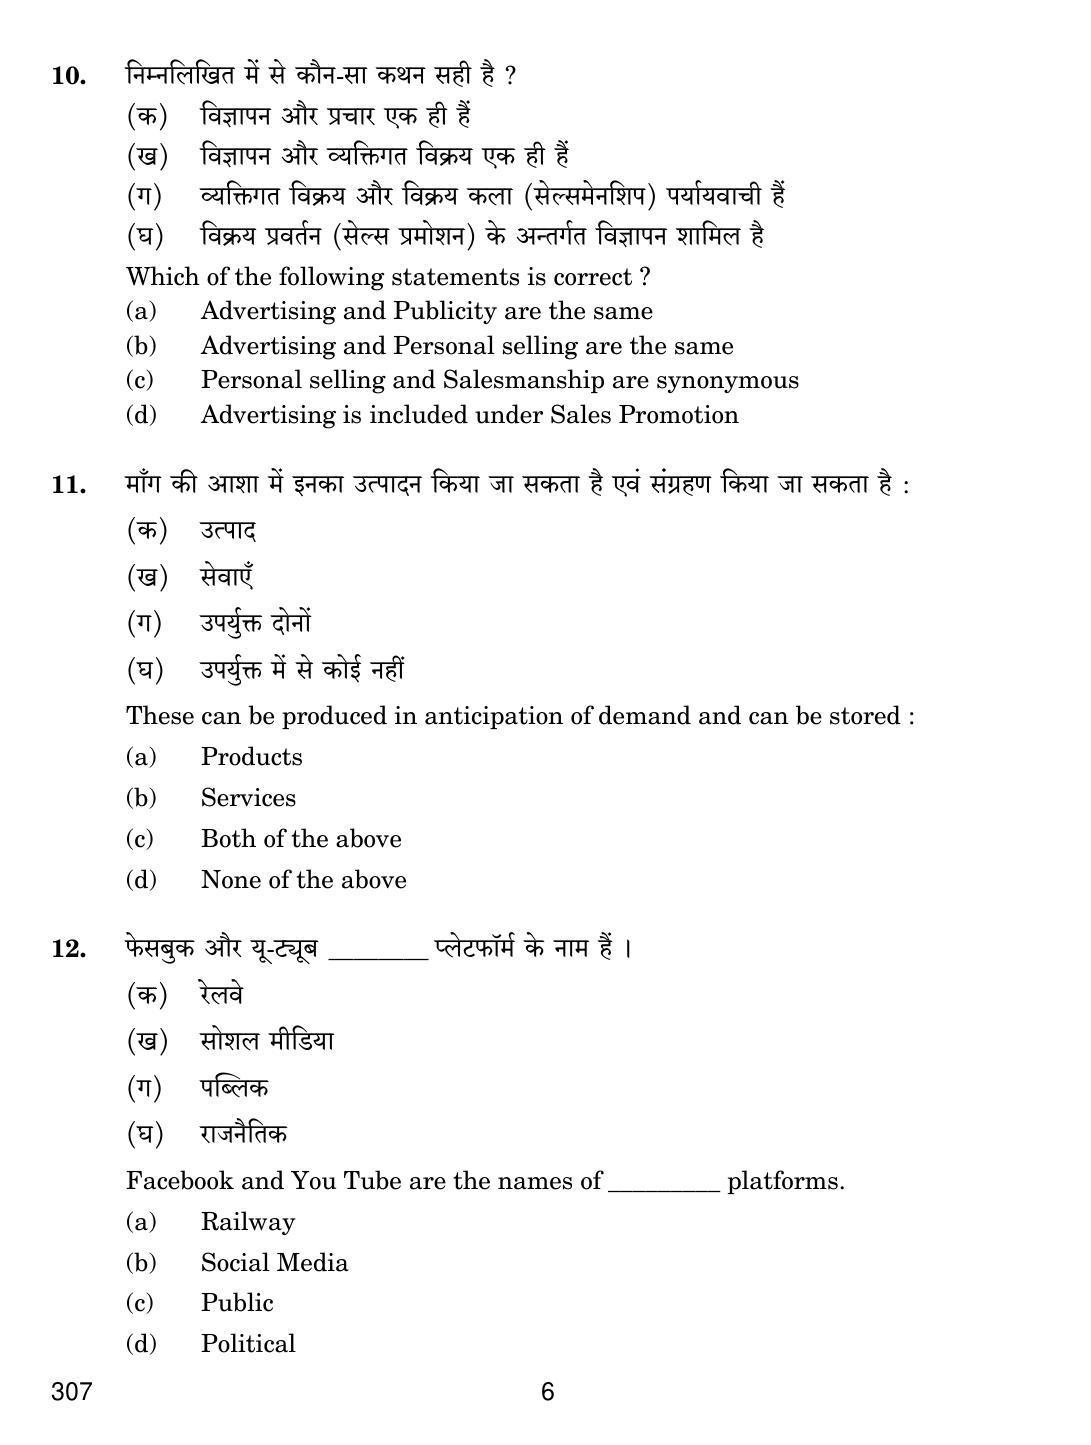 CBSE Class 12 307 Marketing 2019 Question Paper - Page 6